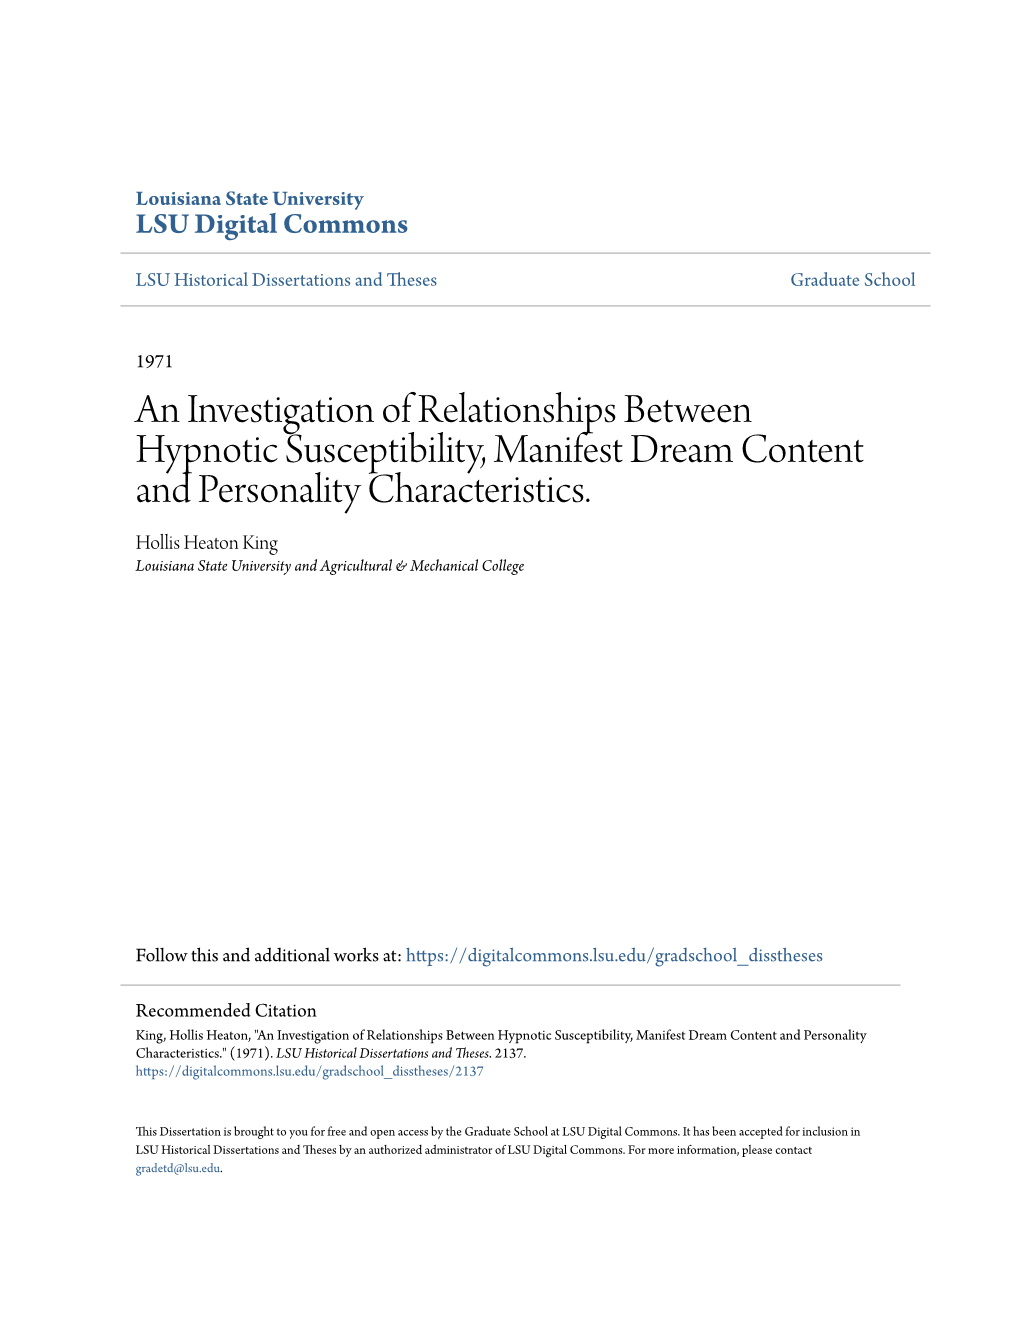 An Investigation of Relationships Between Hypnotic Susceptibility, Manifest Dream Content and Personality Characteristics